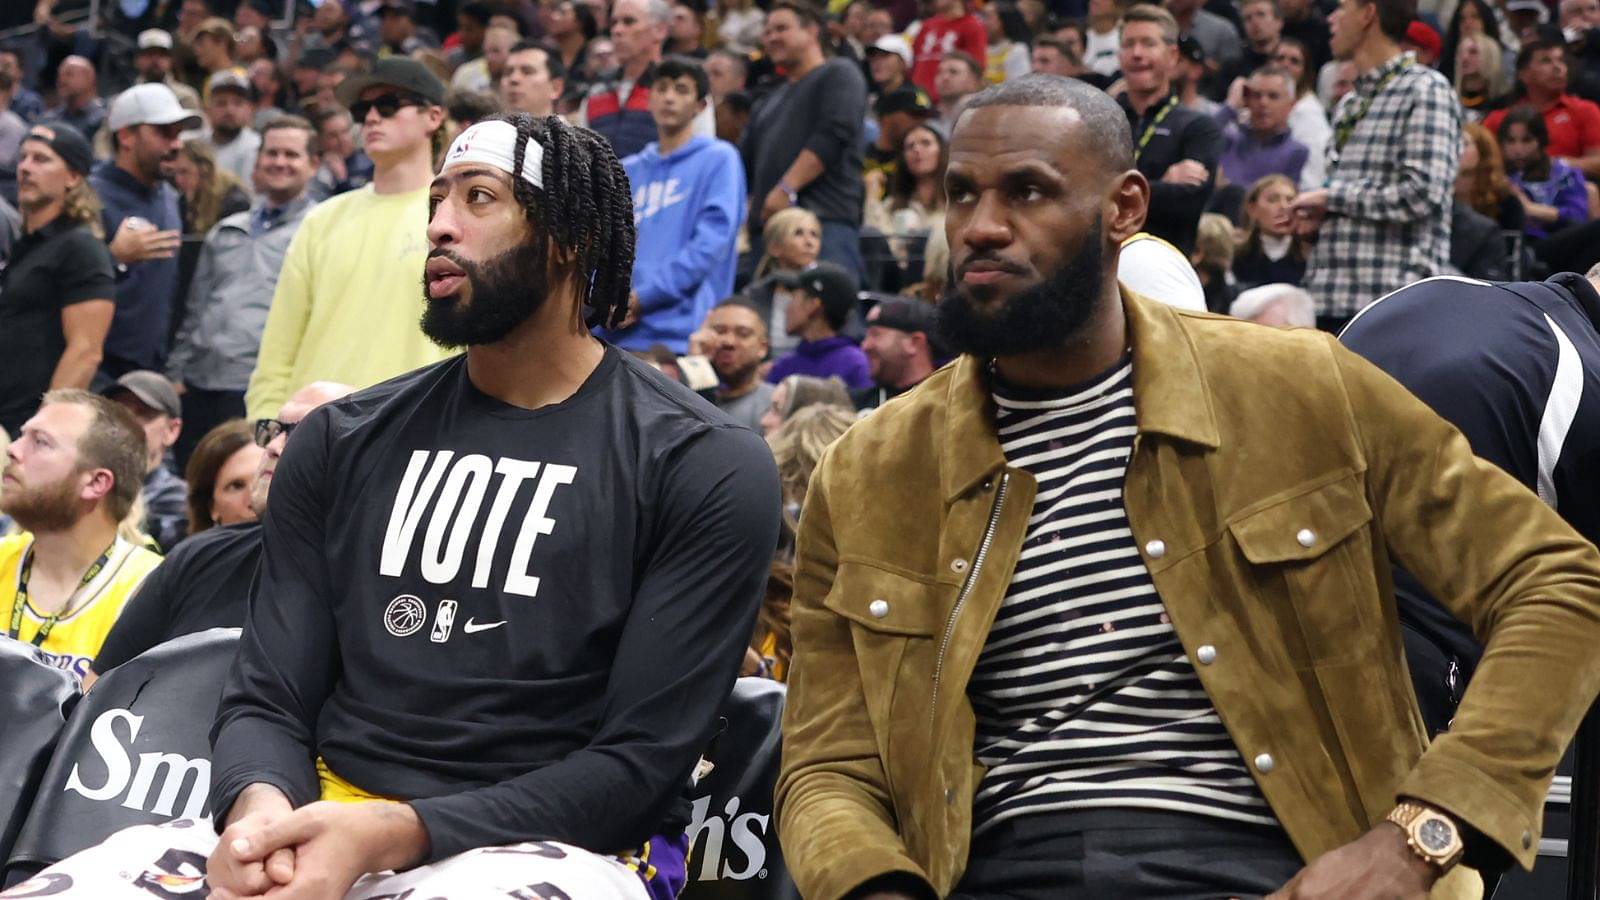 "Trade LeBron James and Anthony Davis!": ESPN's Stephen A Smith Has a WILD Solution to the Lakers' Troubles